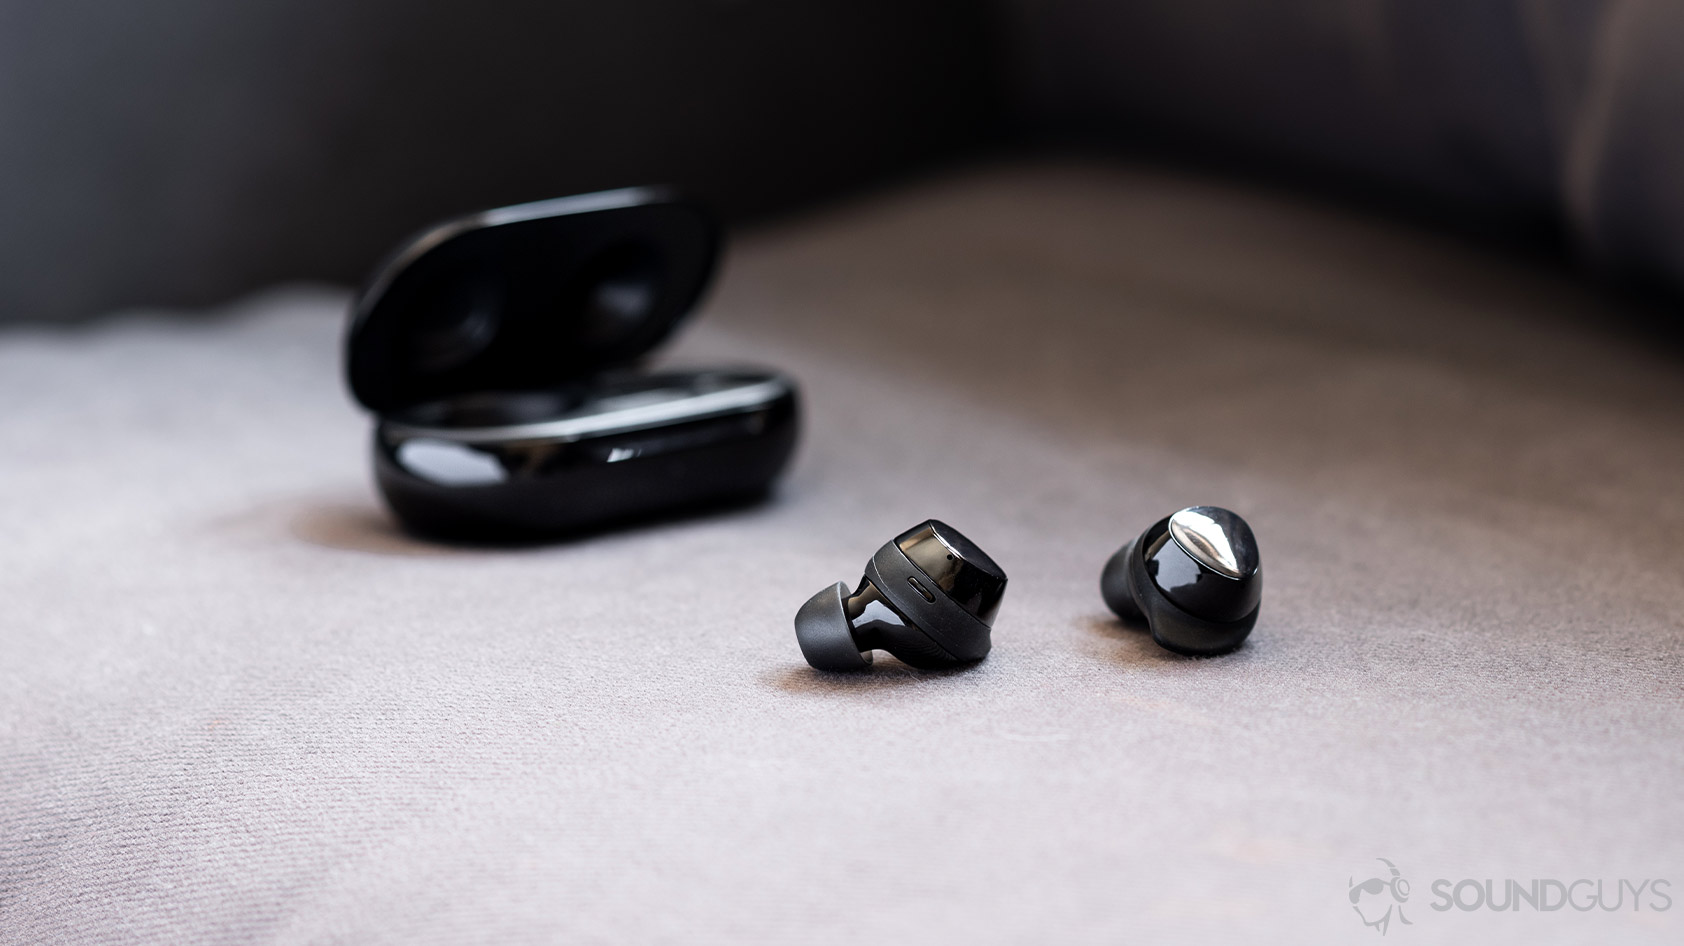 A picture of the Samsung Galaxy Buds Plus true wireless earbuds on a gray surface.